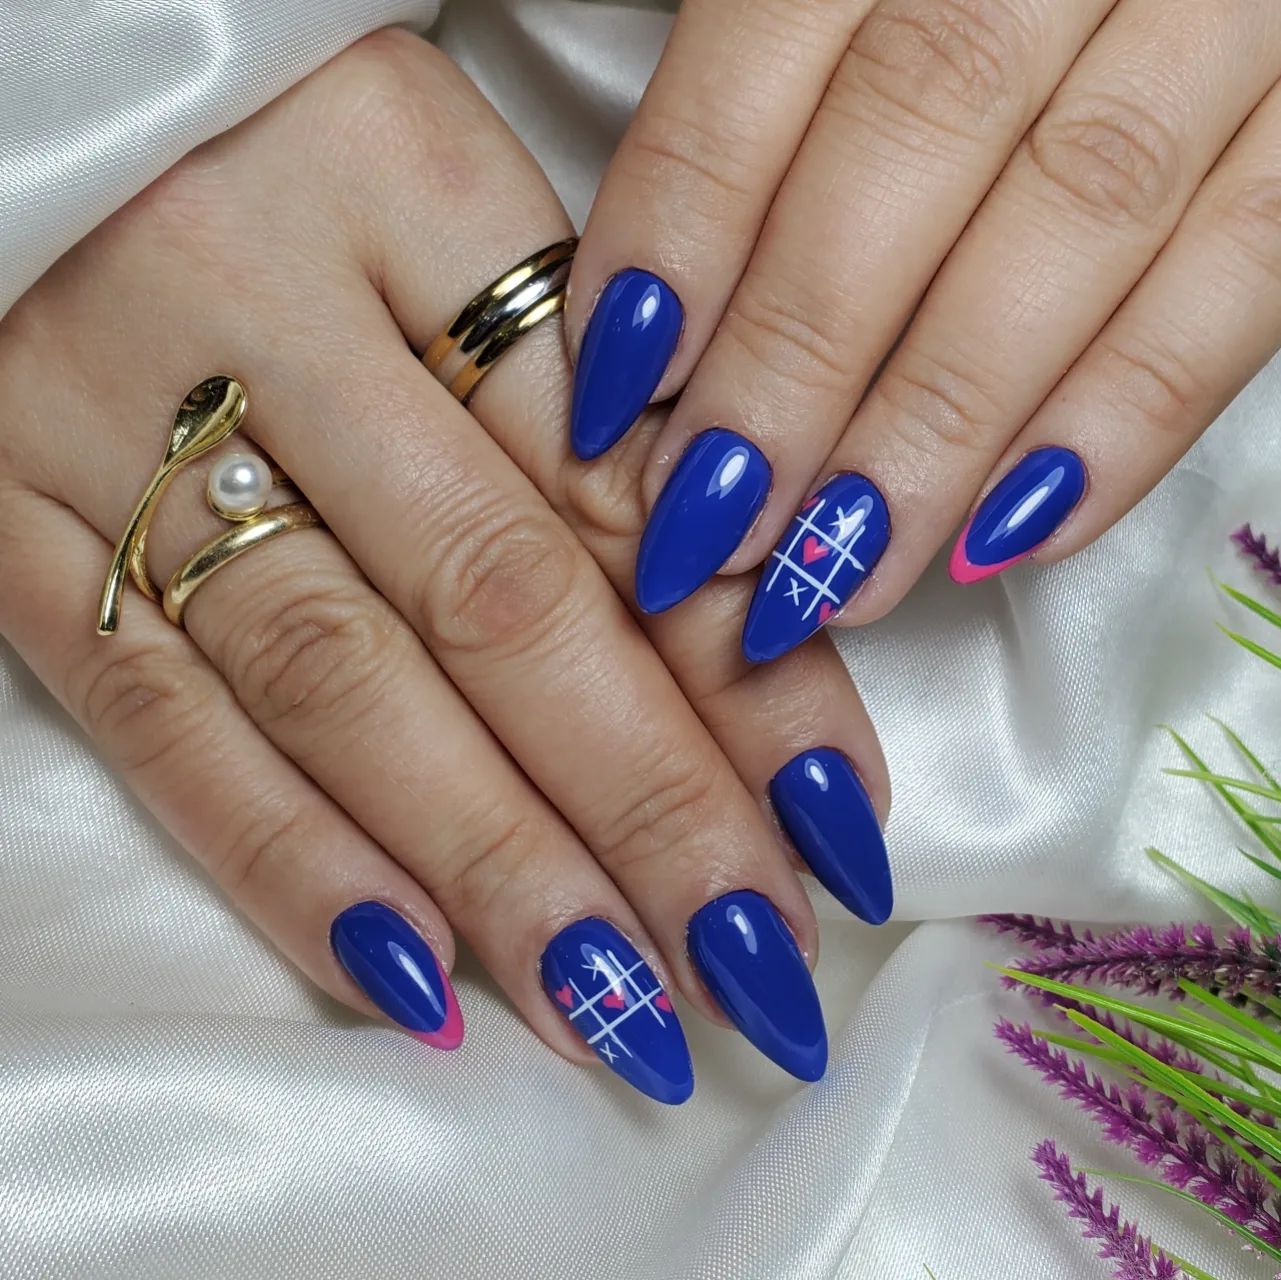 Chic Blue Almond Nails with Geometric Accent